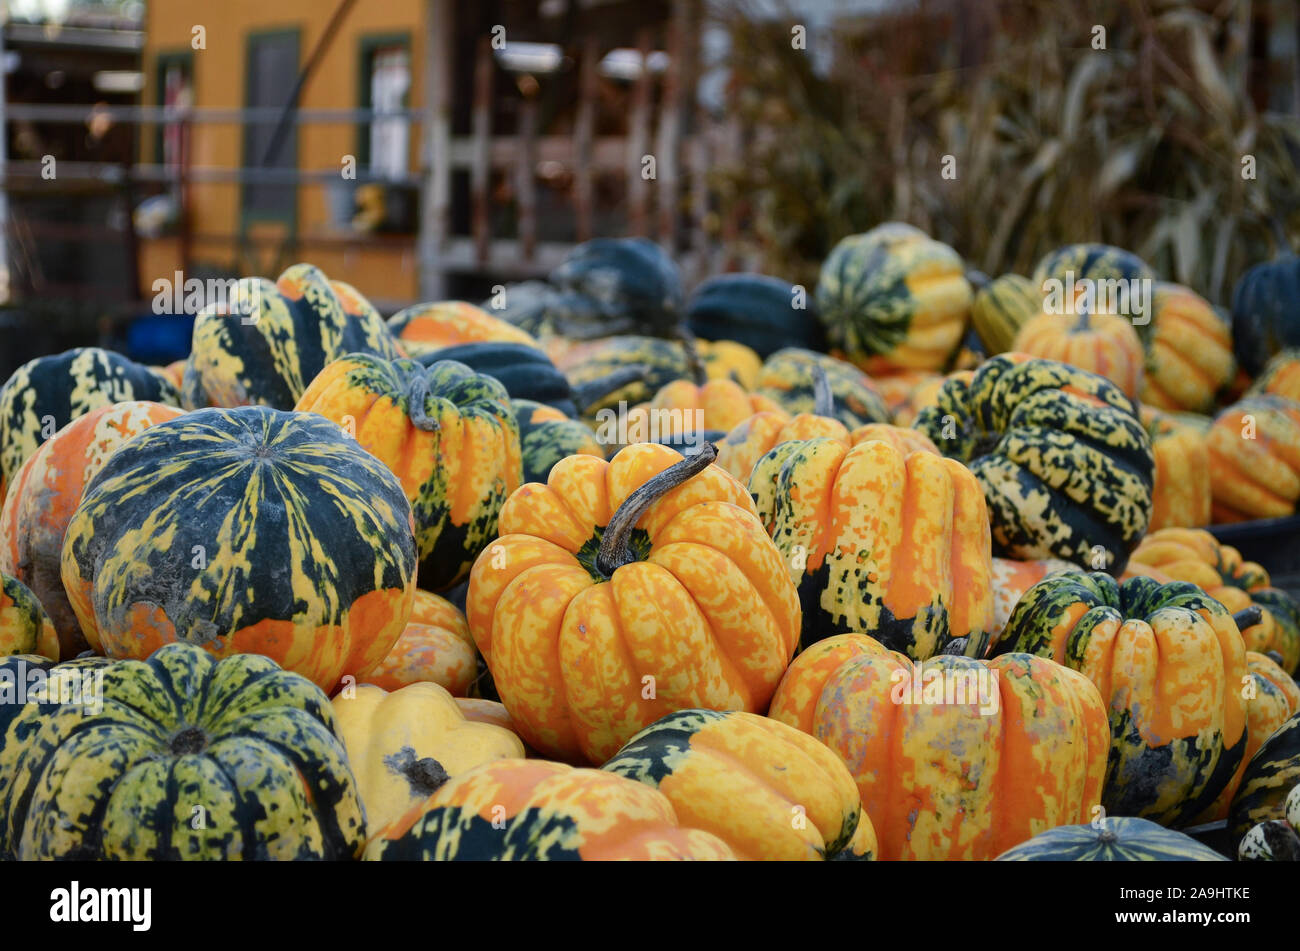 Lots of little pumpkins; small and very colorful Stock Photo